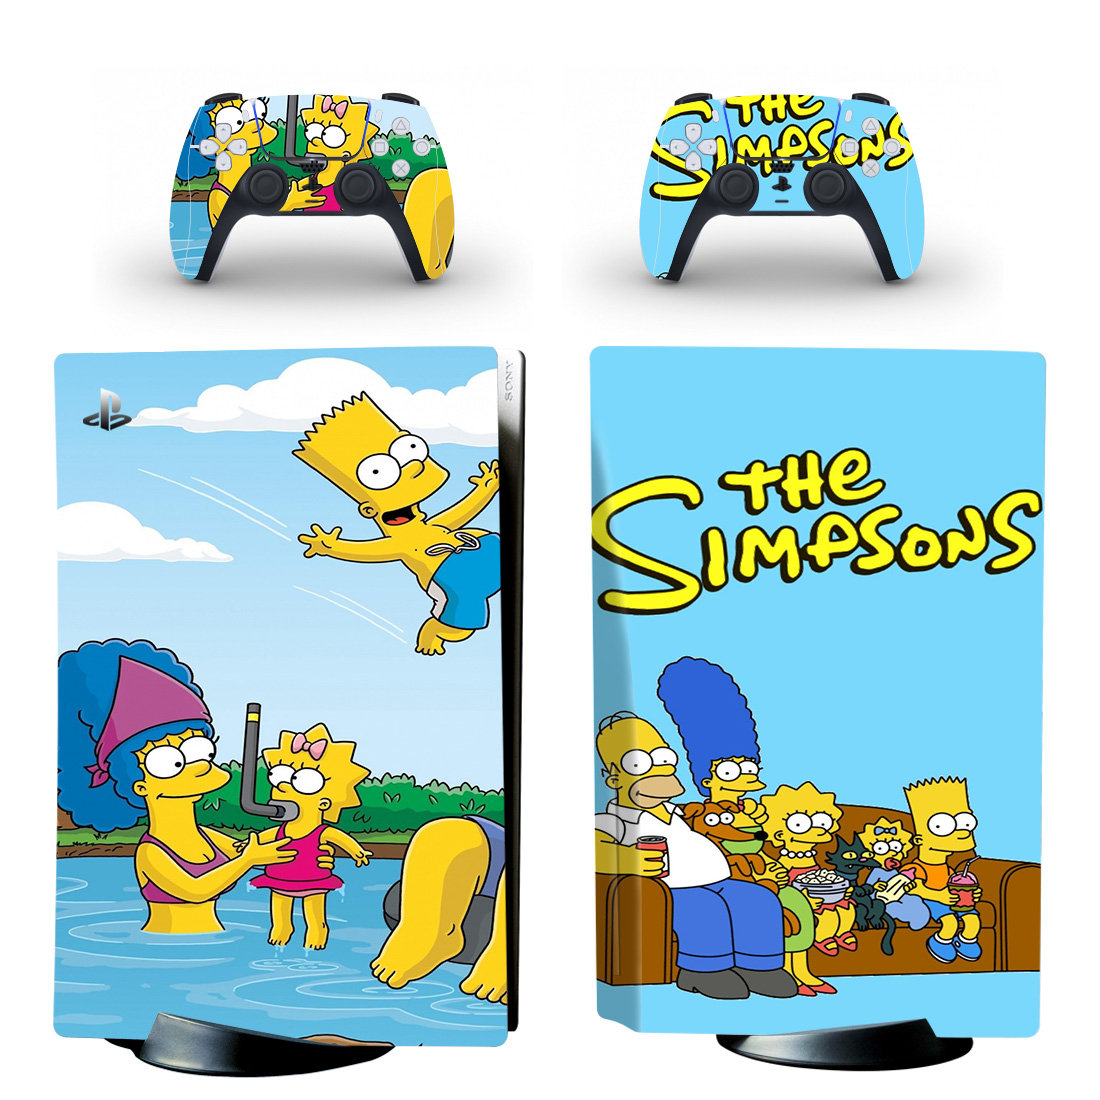 The Simpsons Skin Sticker For PS5 Skin And Controllers Design 1